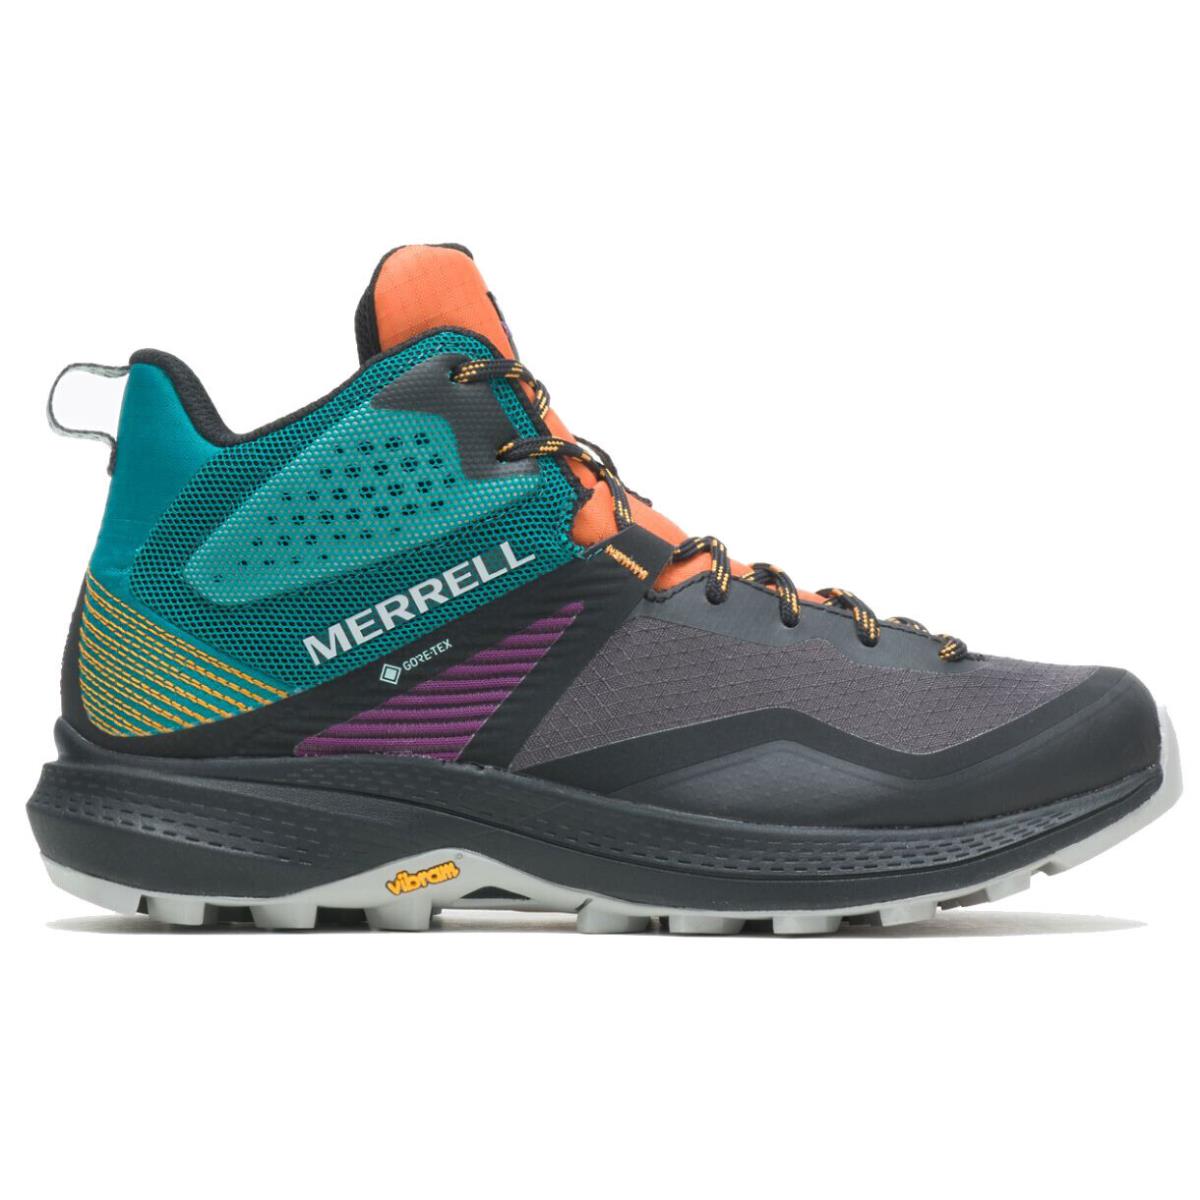 Merrell Women`s Waterproof Gore-tex Breathable Mesh Hiker Boots Removable Insole TANGERINE/TEAL